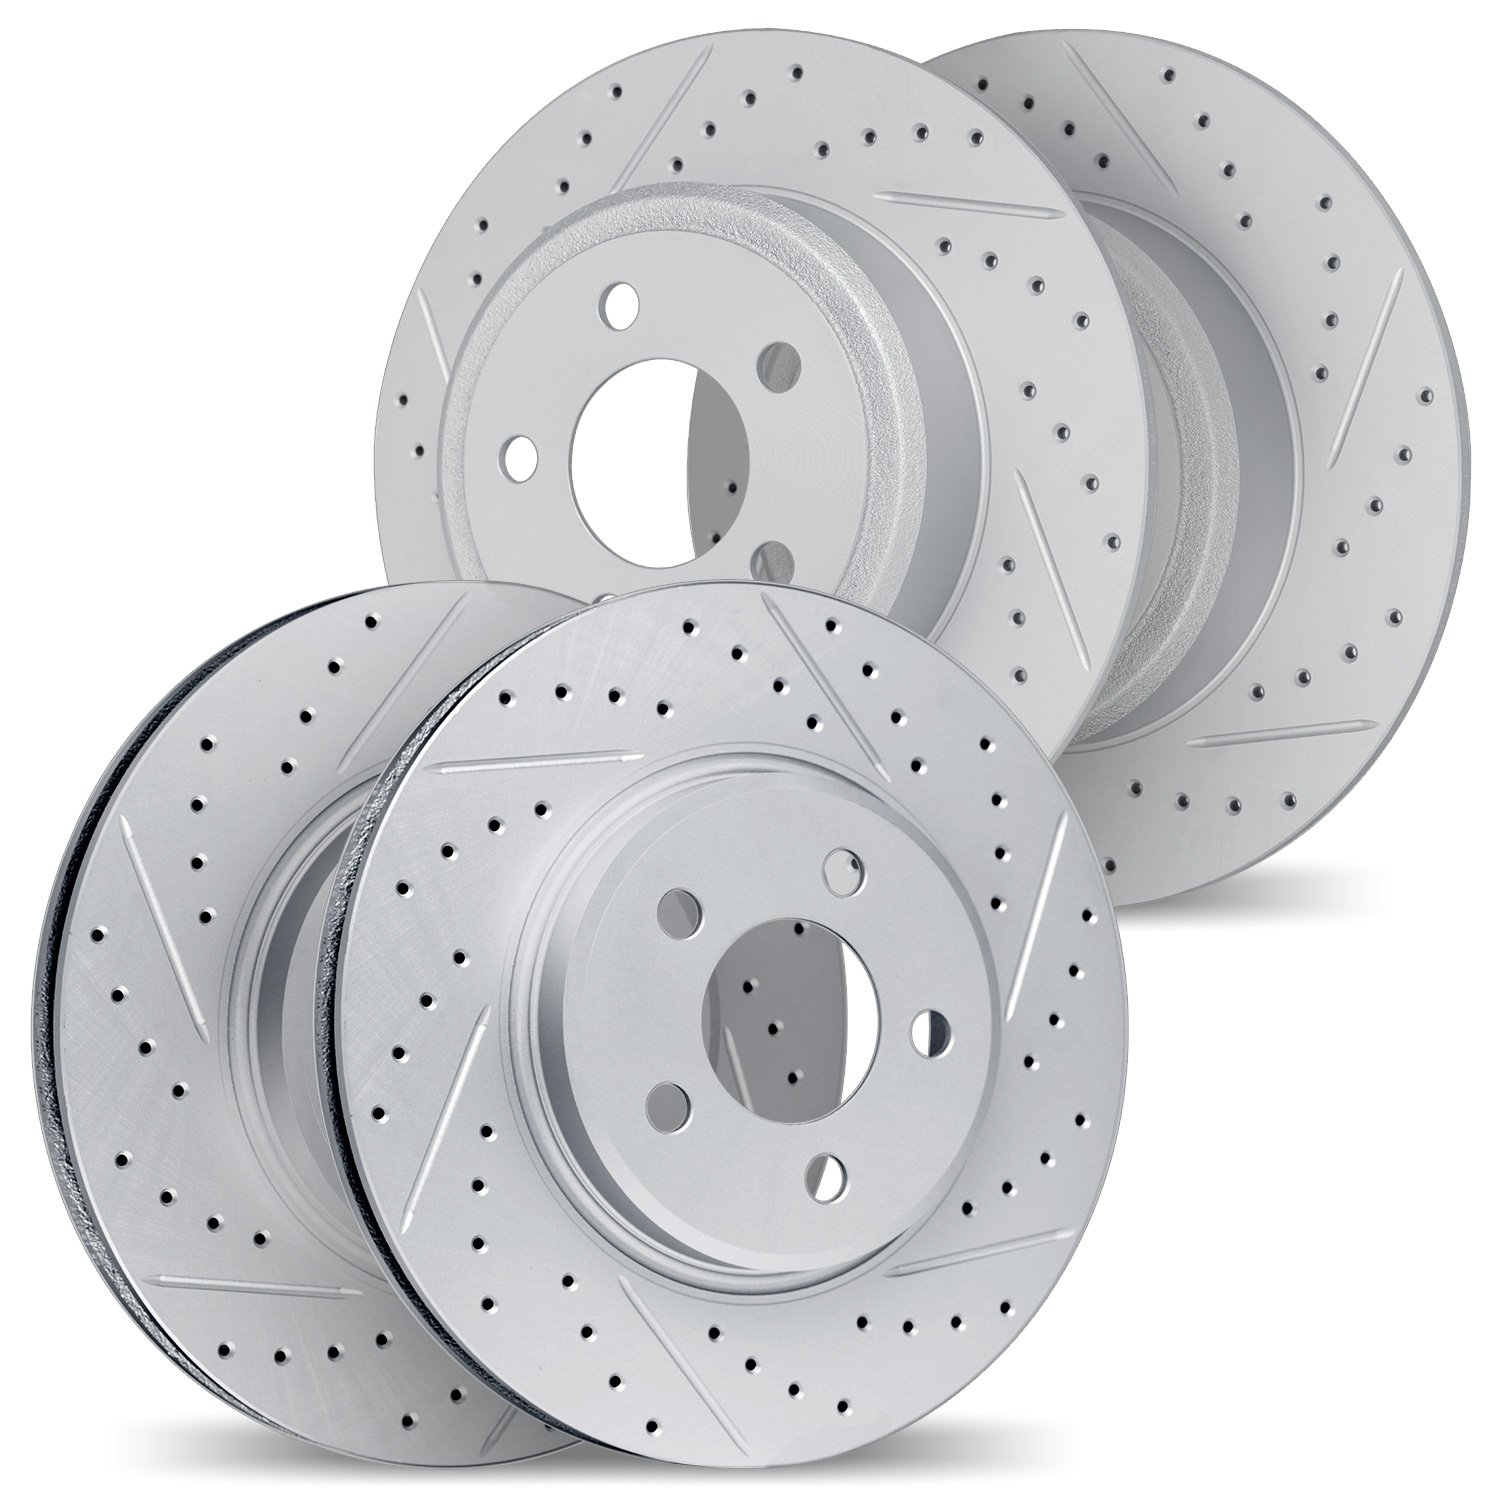 2004-59039 Geoperformance Drilled/Slotted Brake Rotors, 2006-2011 Acura/Honda, Position: Front and Rear